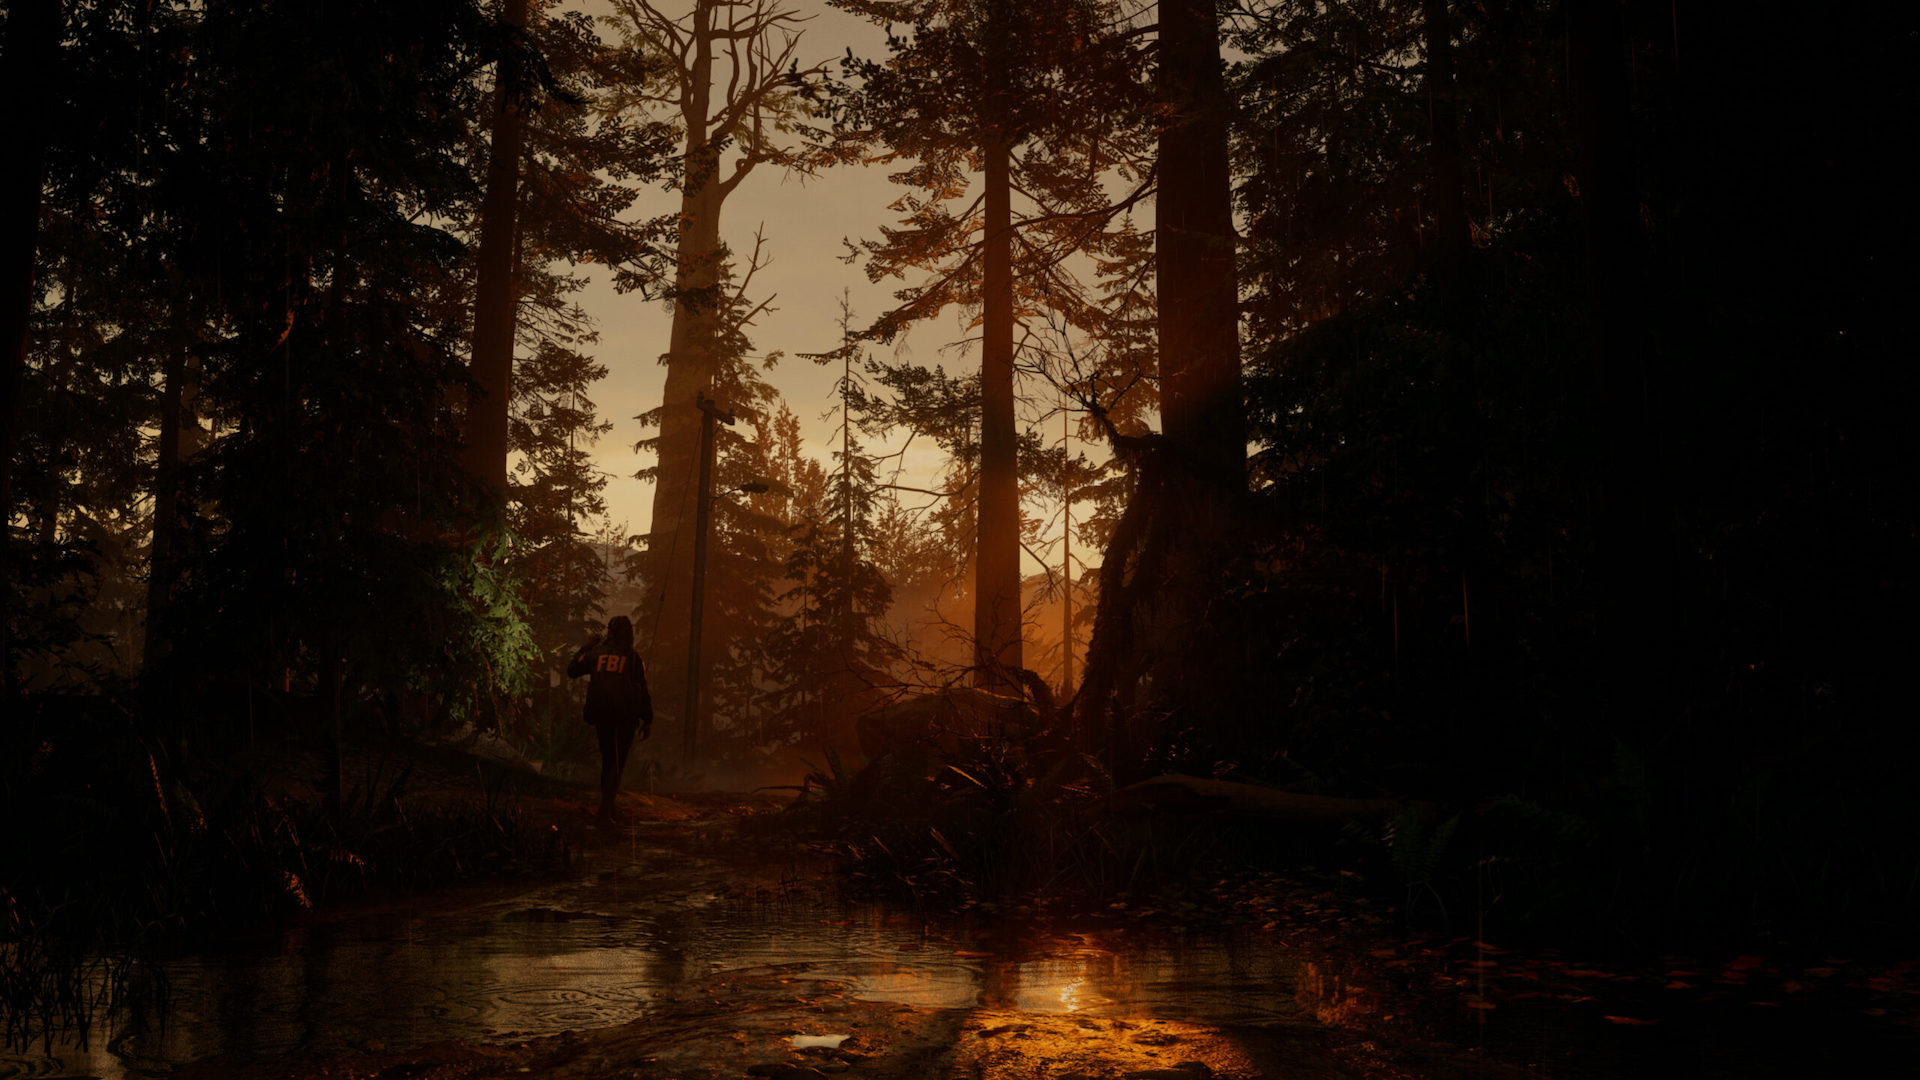 A forest in Alan Wake 2, with an FBI agent walking through it as the sun sets